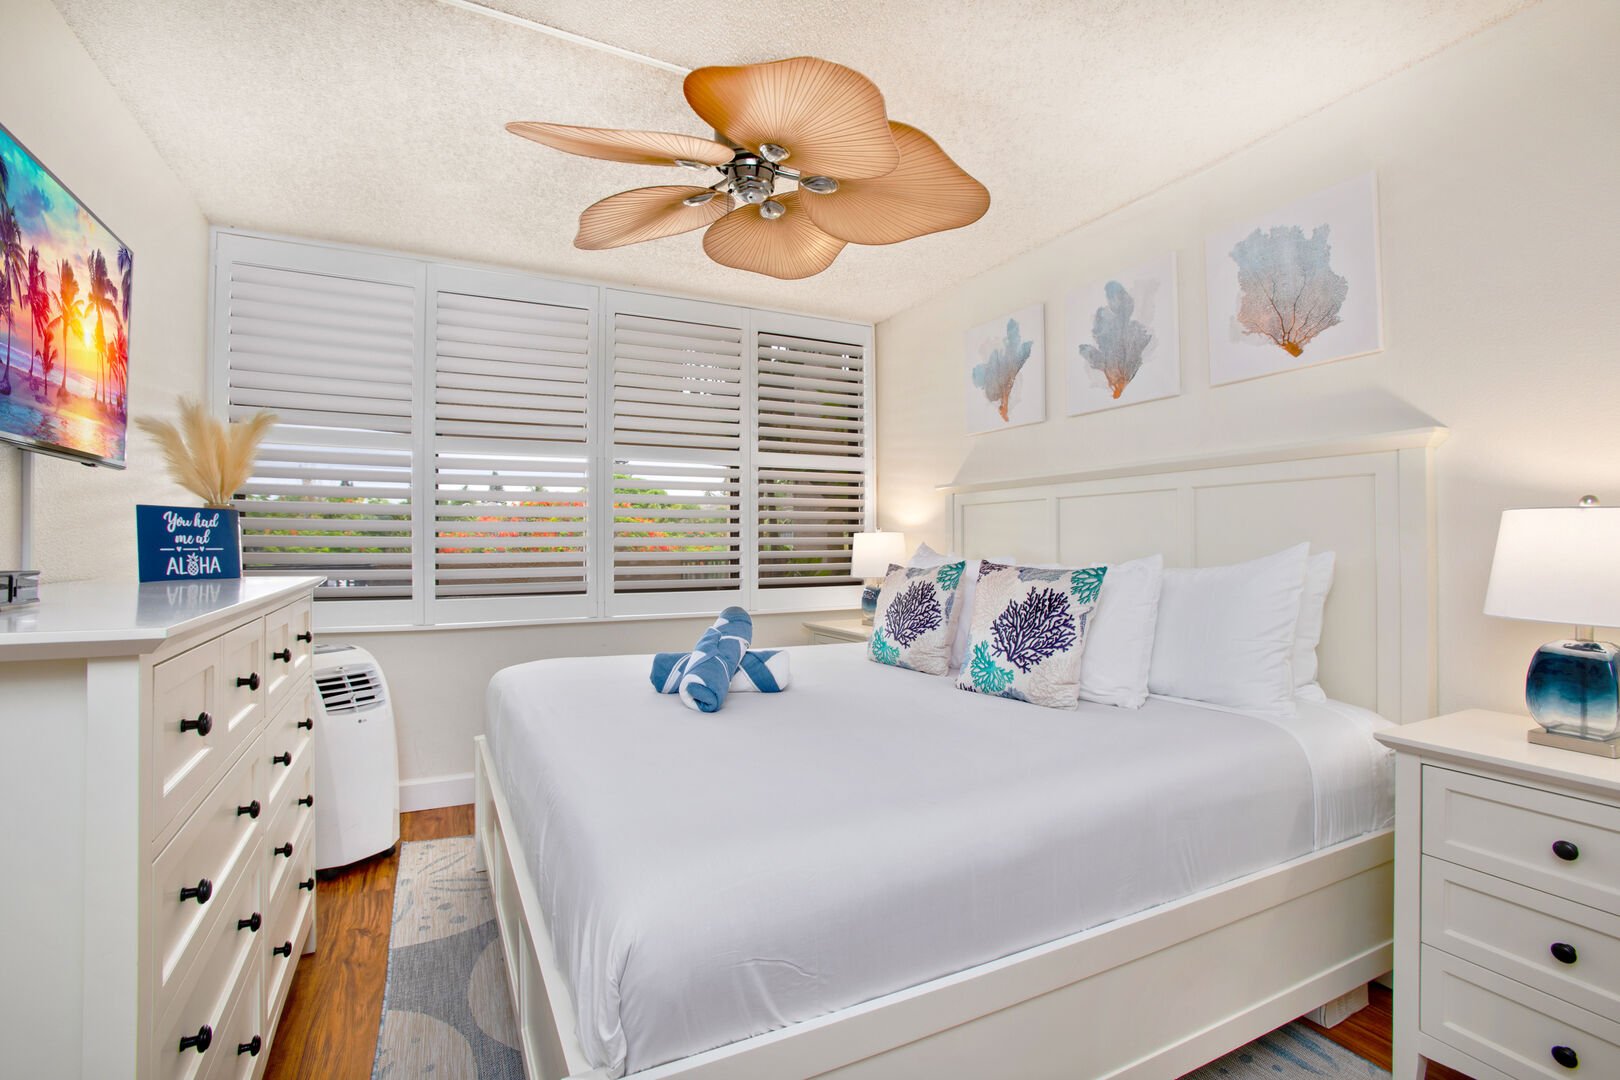 The bedroom boasts a king-size bed, flat-screen TV, nightstand, ceiling fan, and a closet!